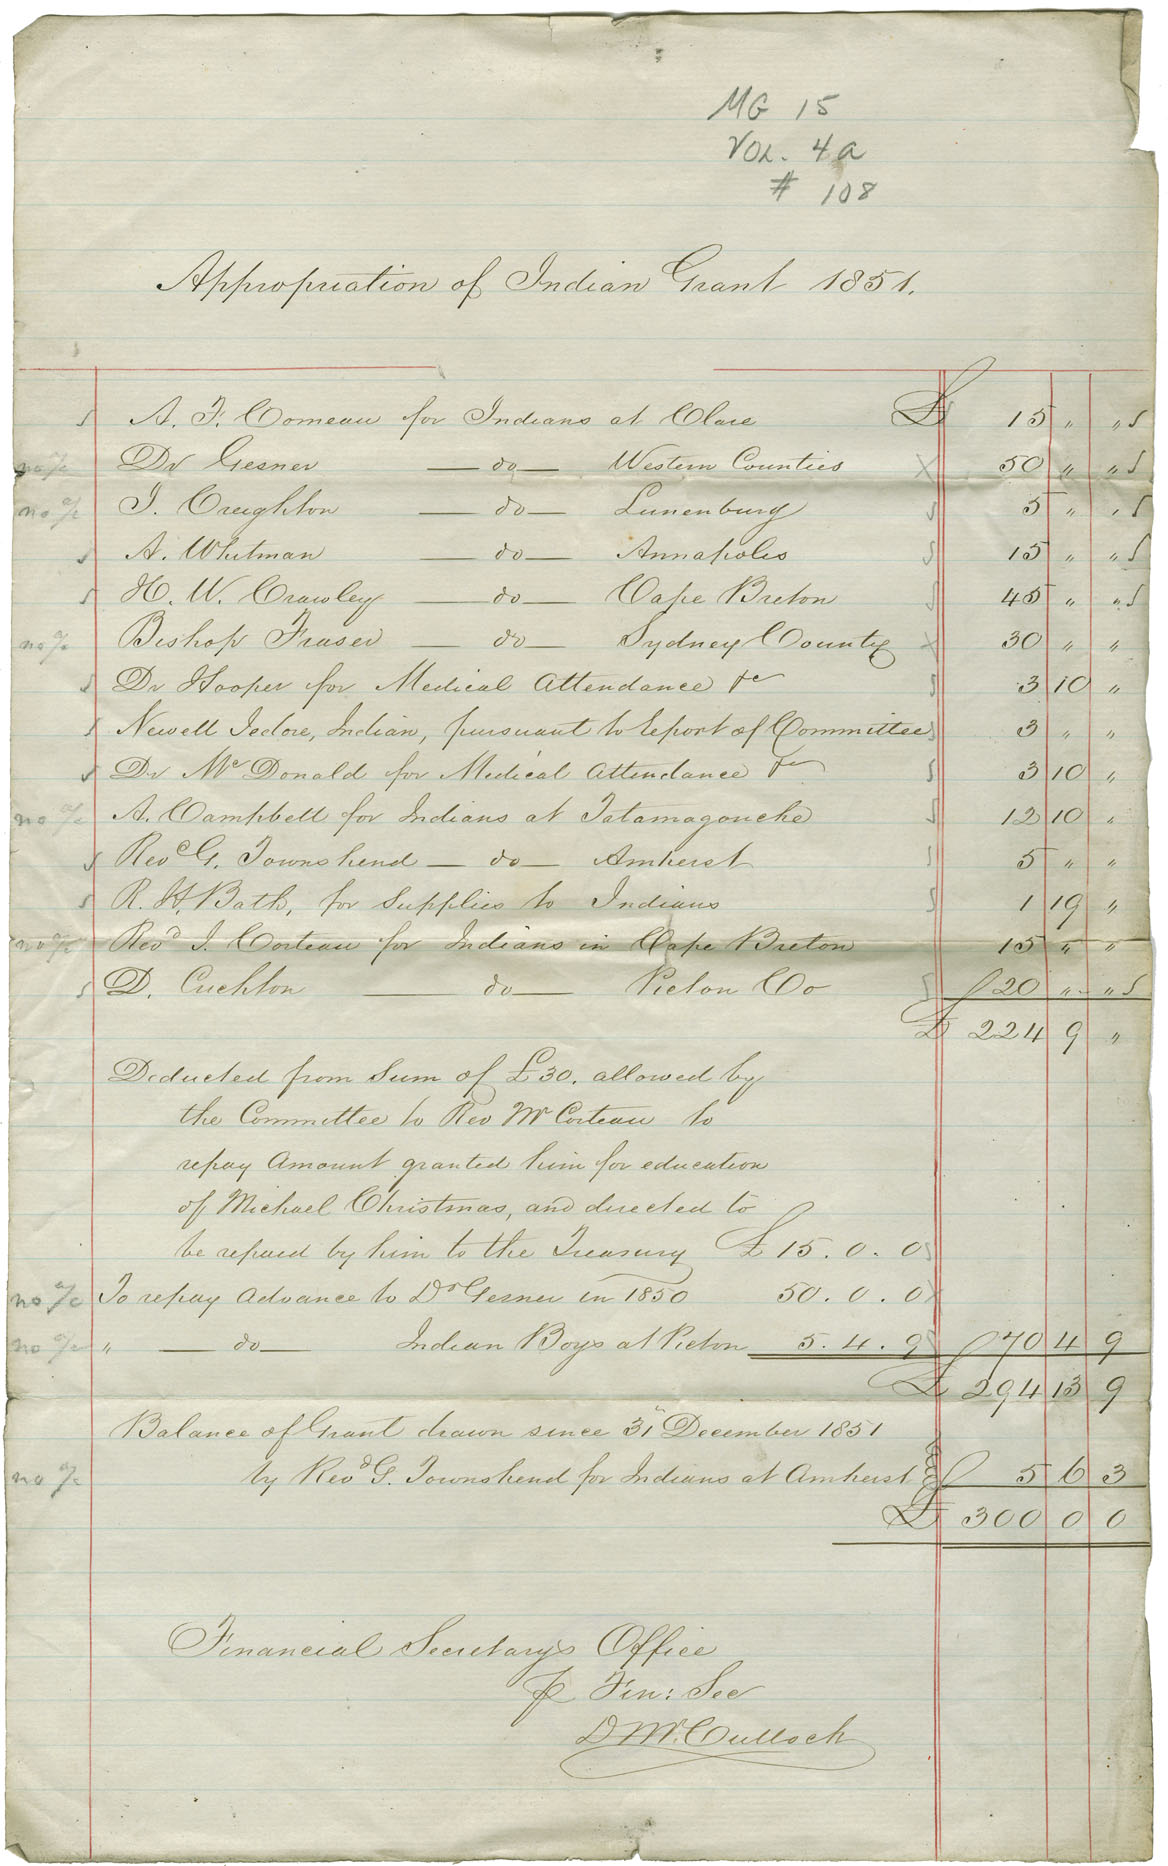 Appropriation of Indian Grant for 1851 throughout Nova Scotia.